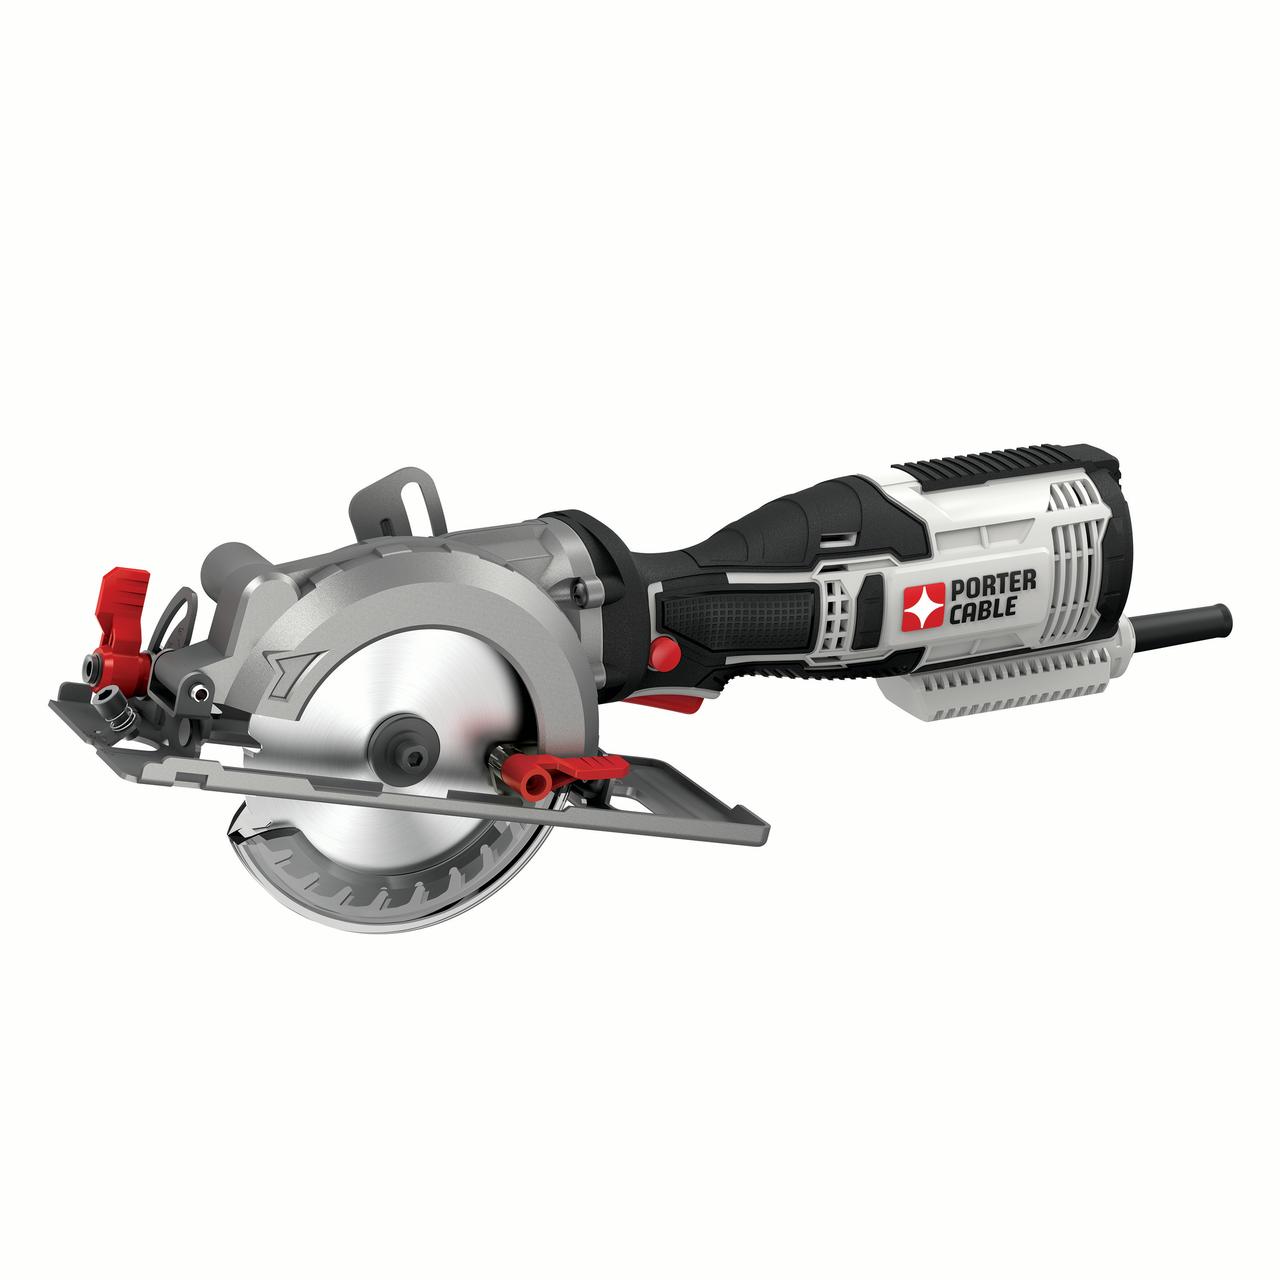 PORTER CABLE 5.5-Amp 4.5-Inch Compact Circular Saw Kit, PCE381K - image 1 of 3